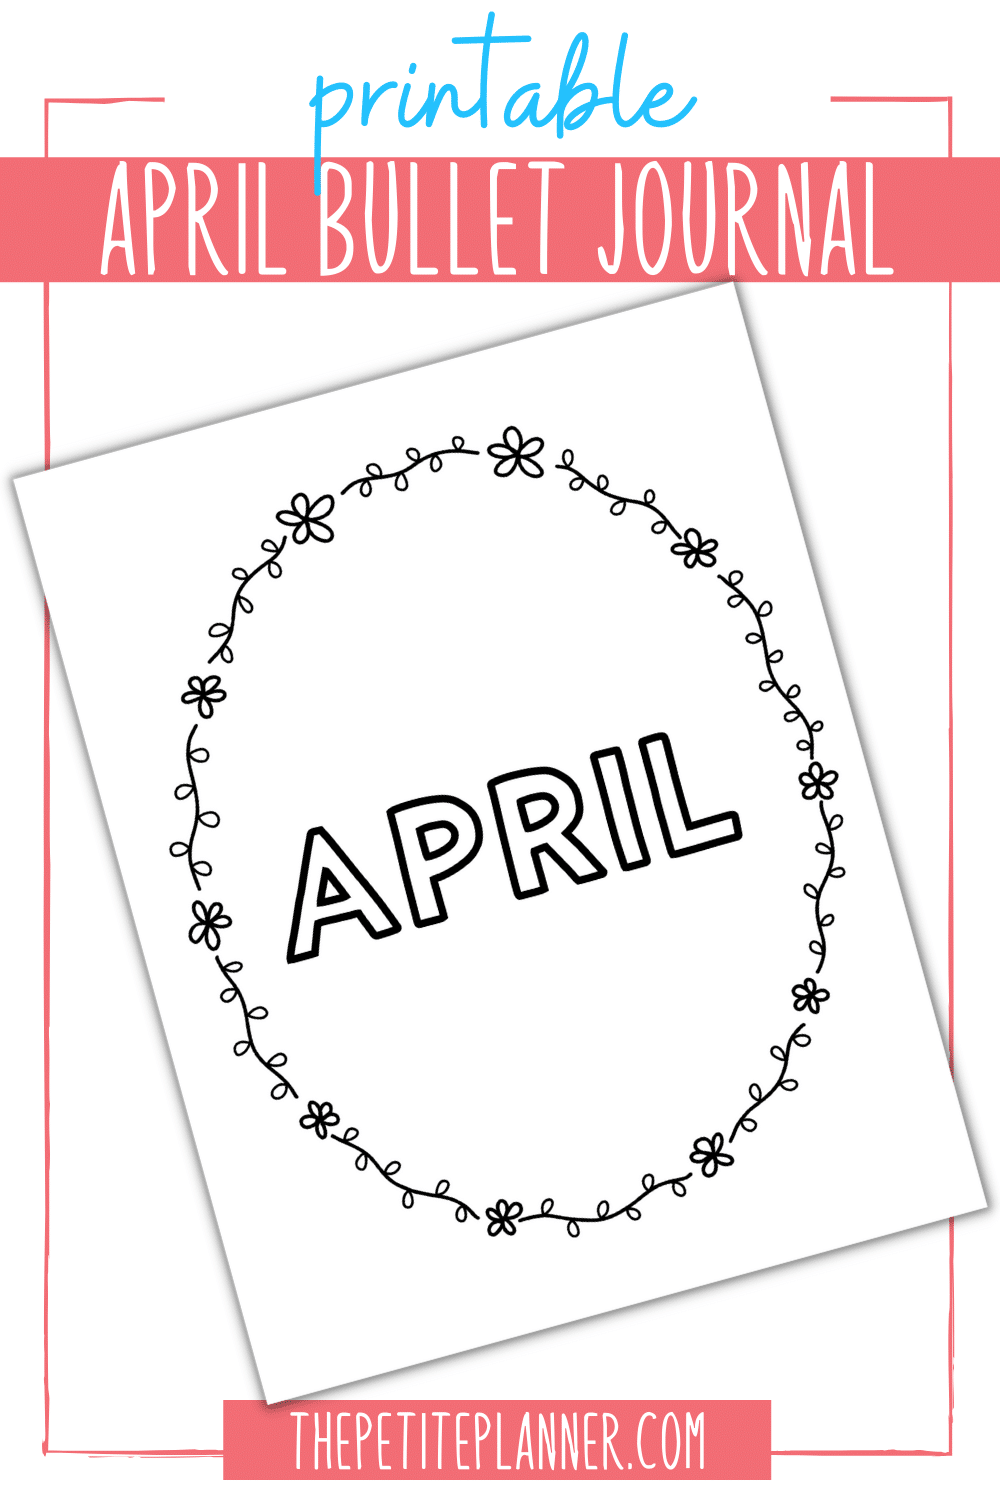 Image of cover page of printable bullet journal for April with flower wreath